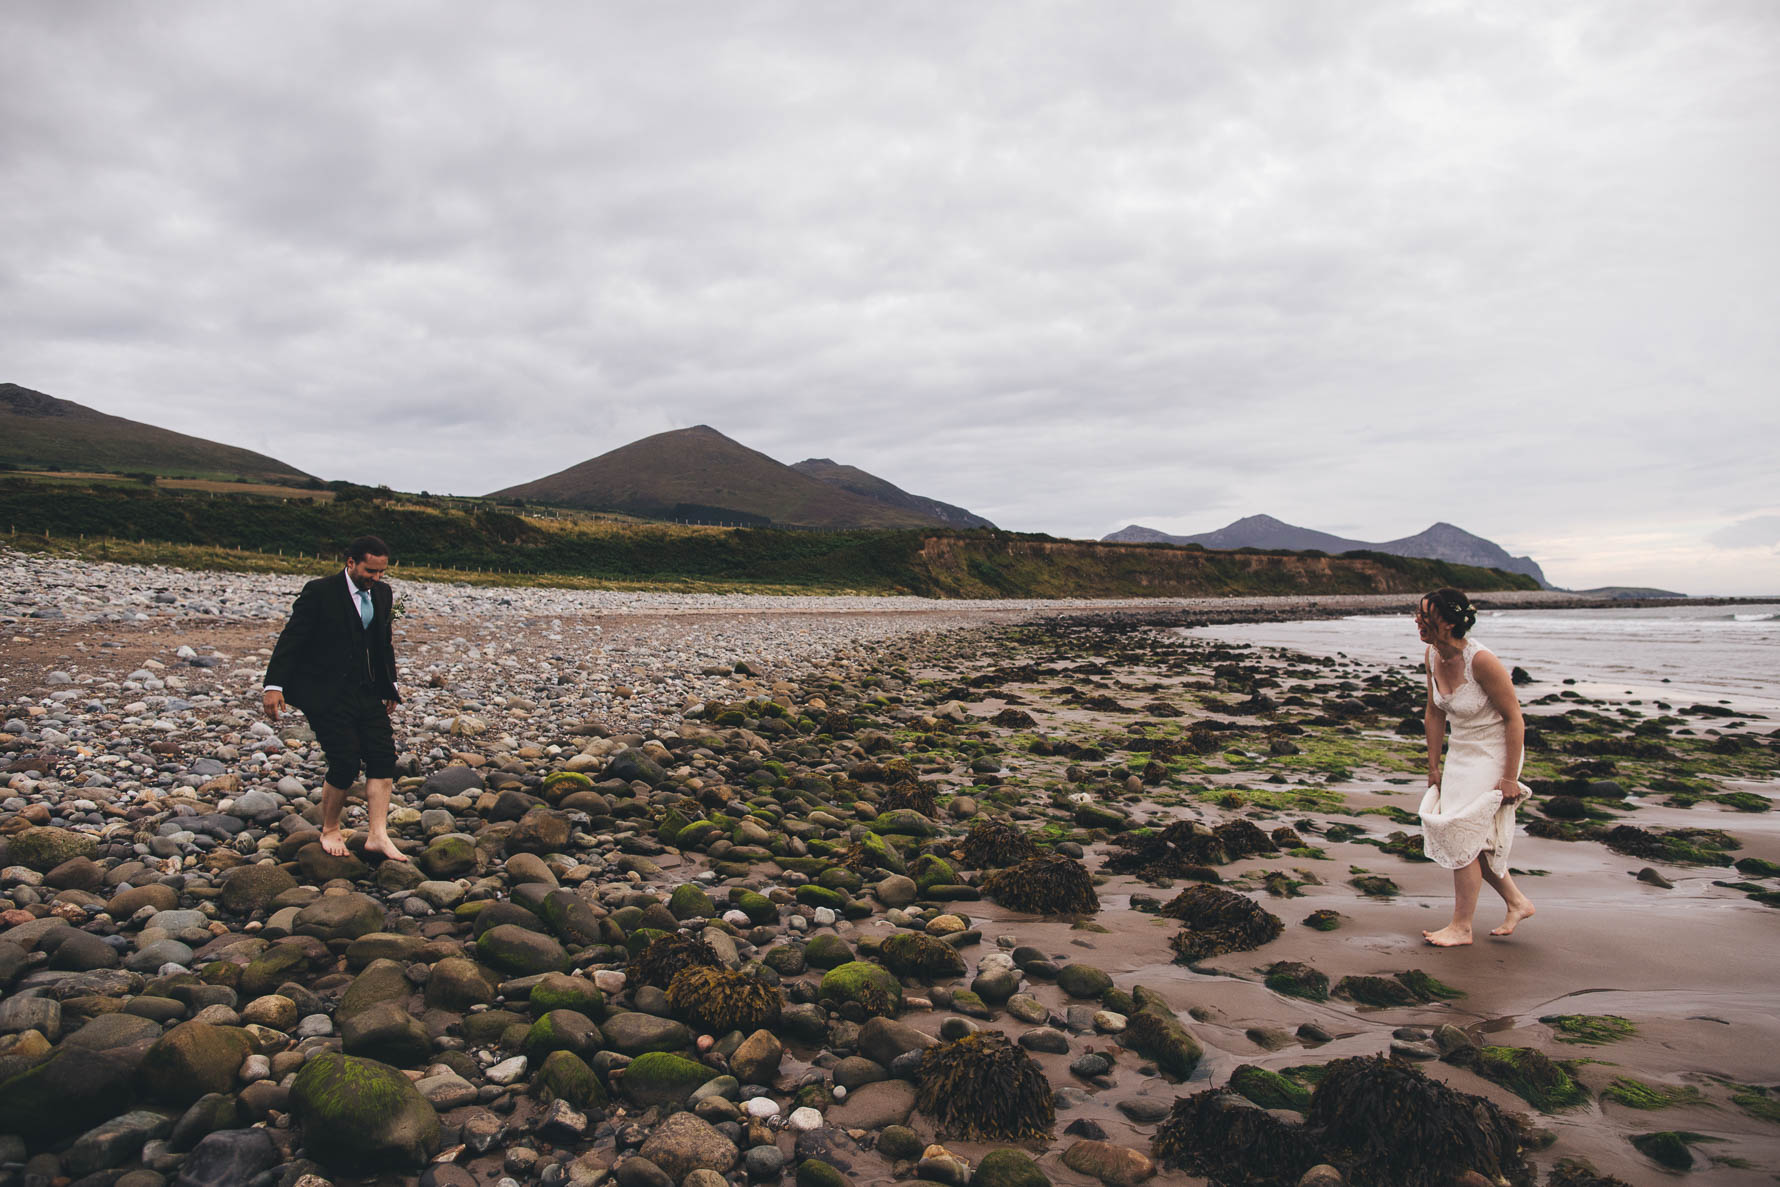 Bride and groom barefoot as they walk over pebbles an rocks at the seaside with mountains in the background